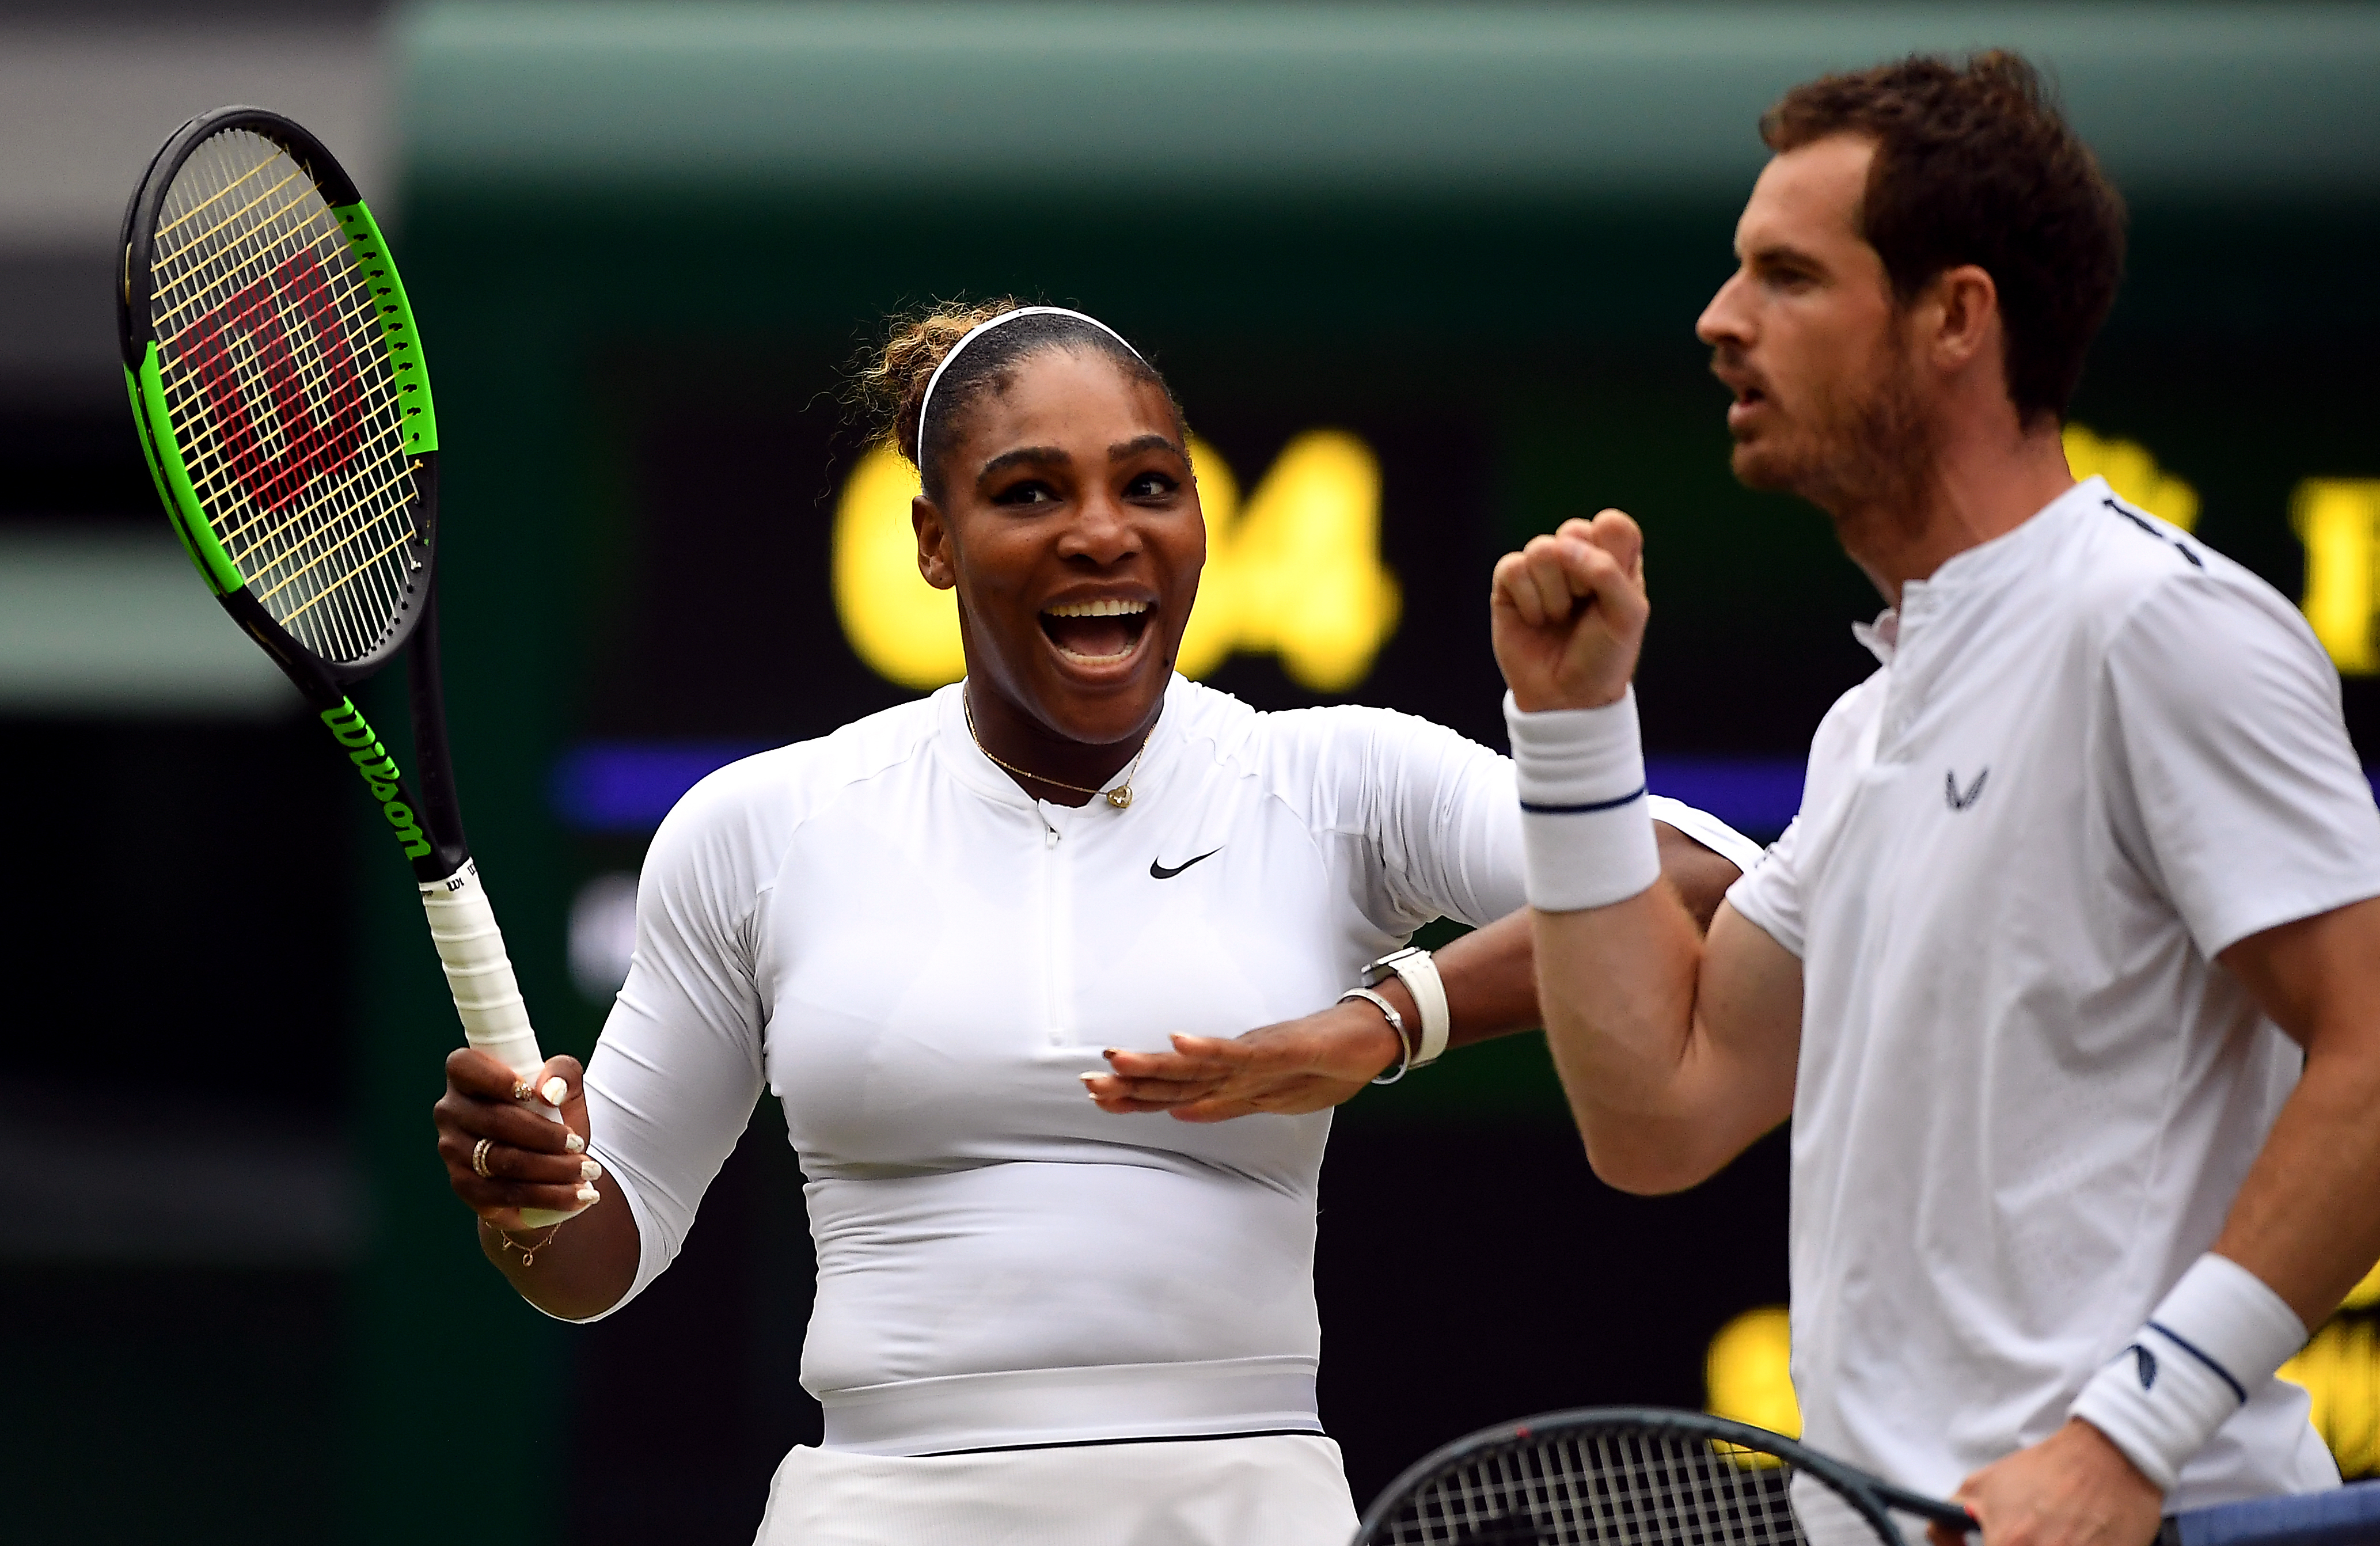 Serena Williams and Andy Murray during their mixed doubles match on day eight of the Wimbledon Championships at the All England Lawn Tennis and Croquet Club, Wimbledon.